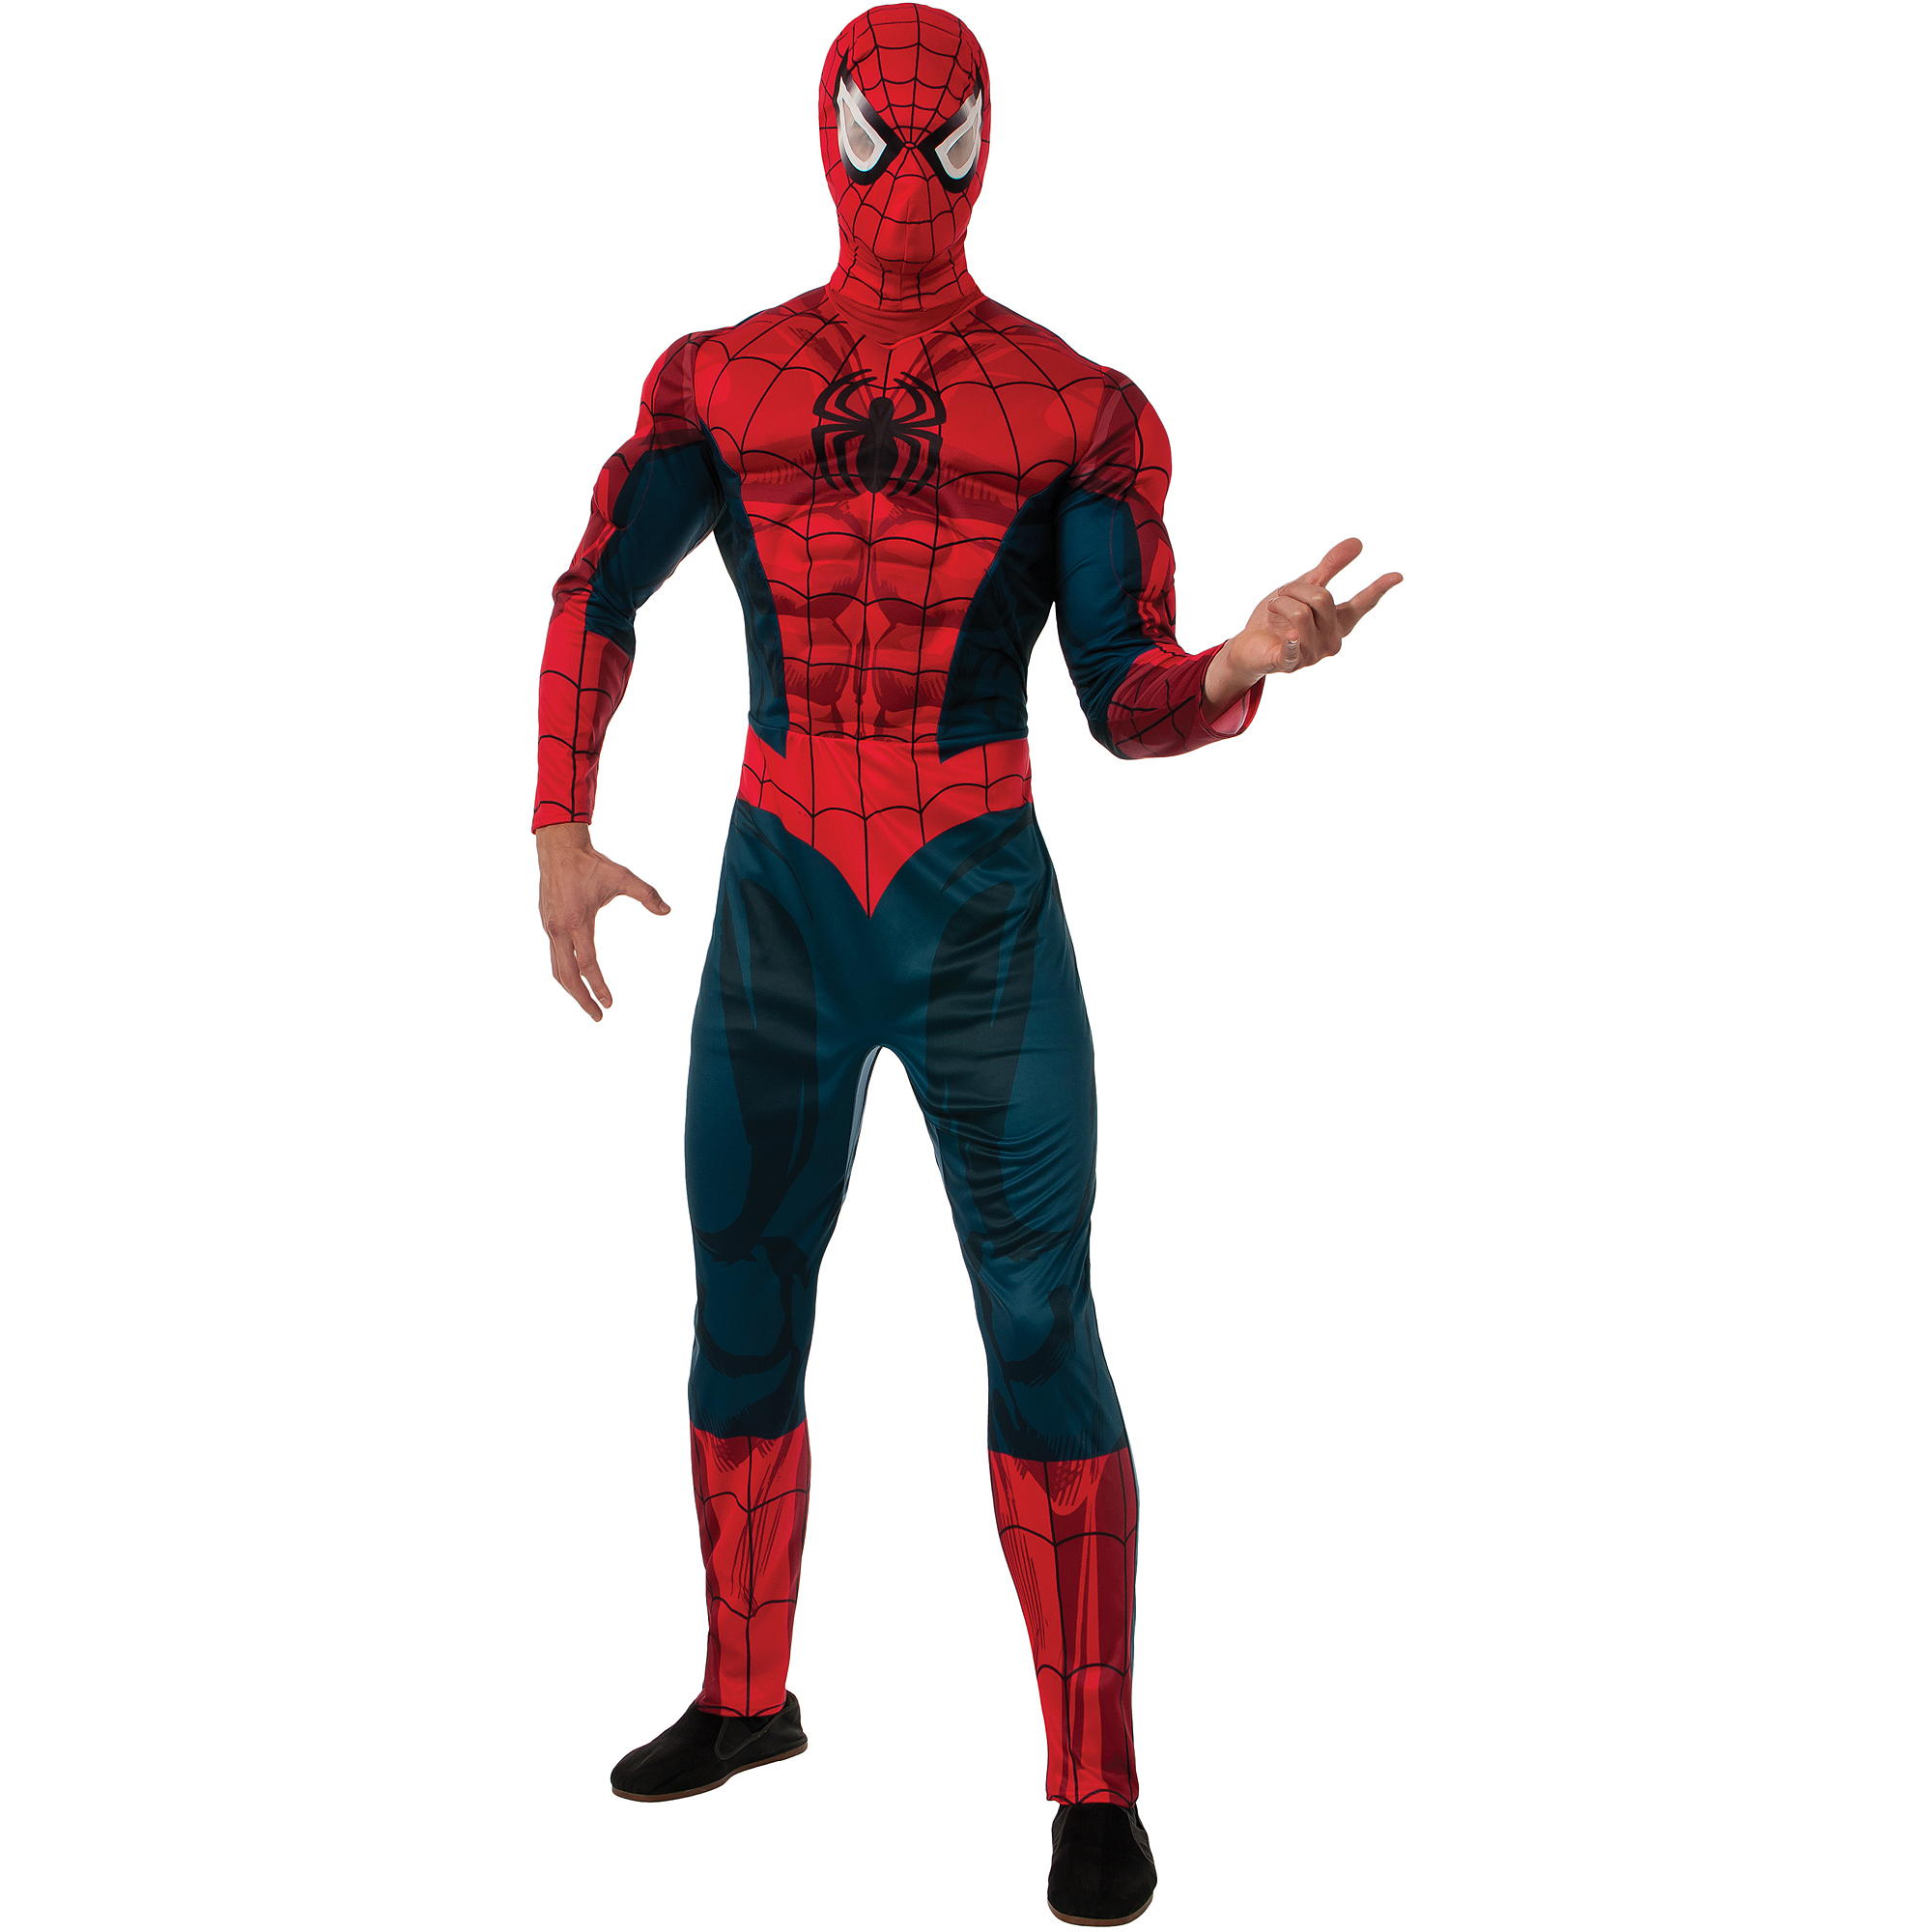 Deluxe Muscle Chest Spider-Man Adult Halloween Costume - image 1 of 2